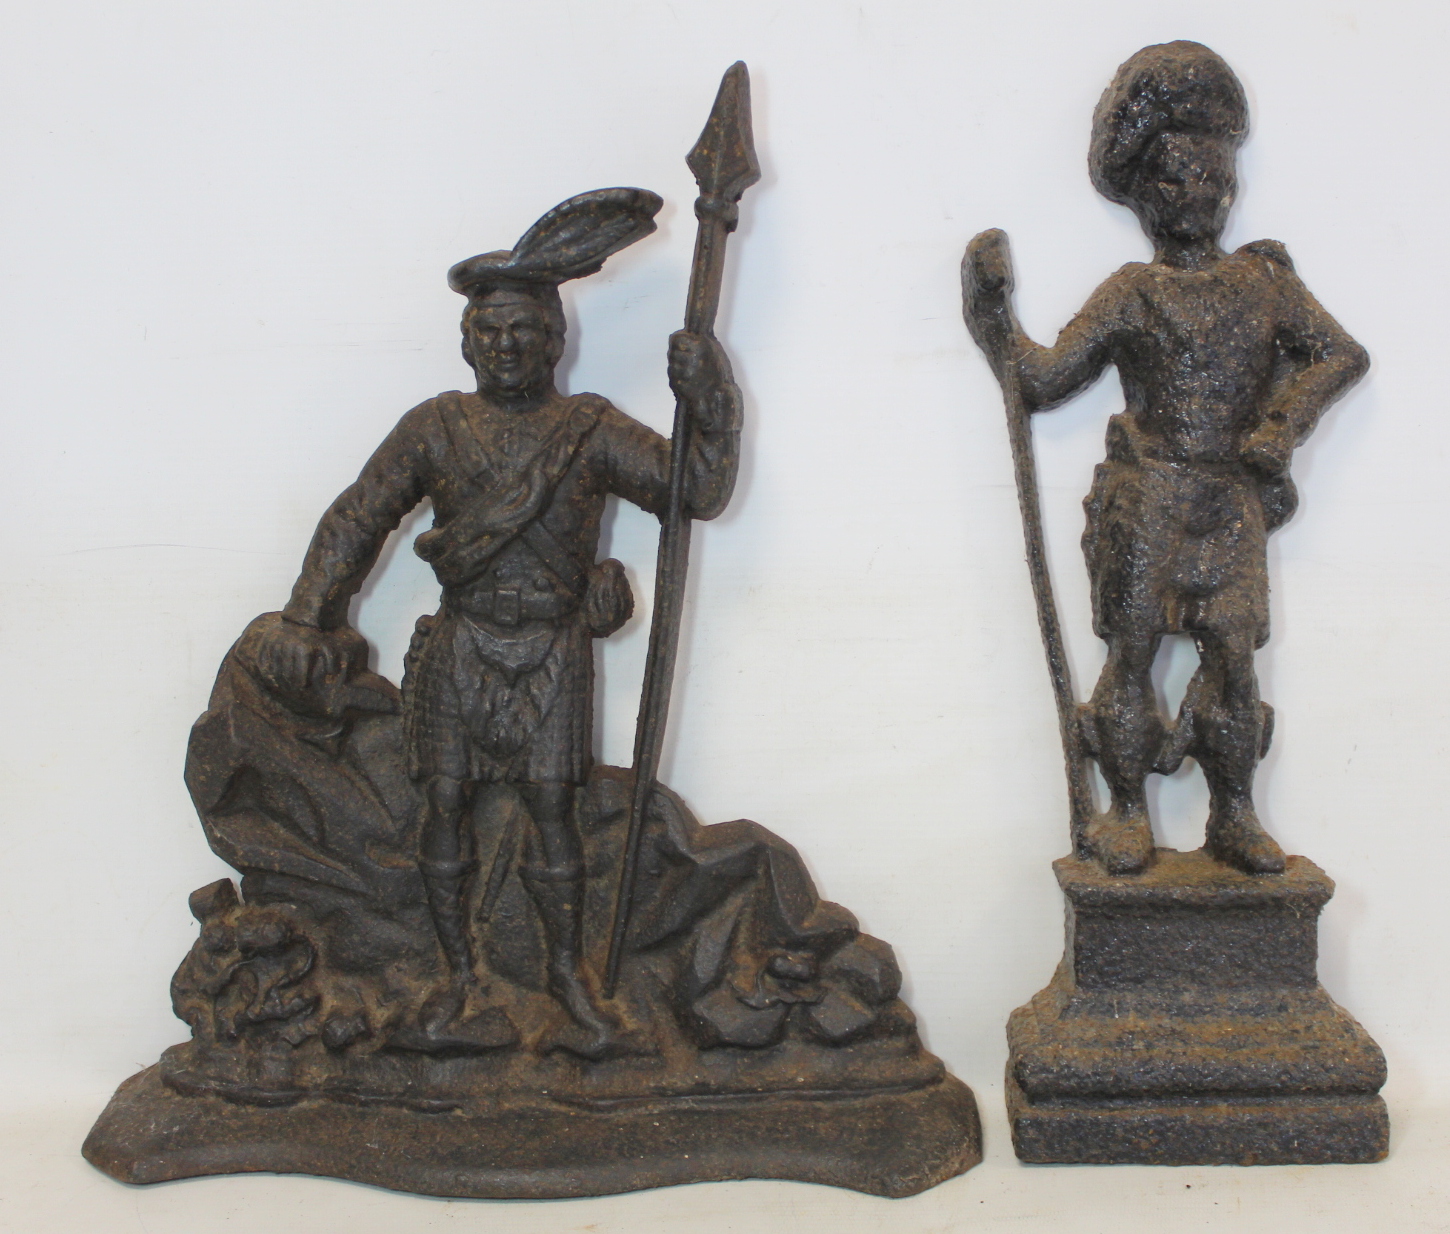 Late 19th/early 20th century cast iron doorstop of a kilted highlander with spear standing on a